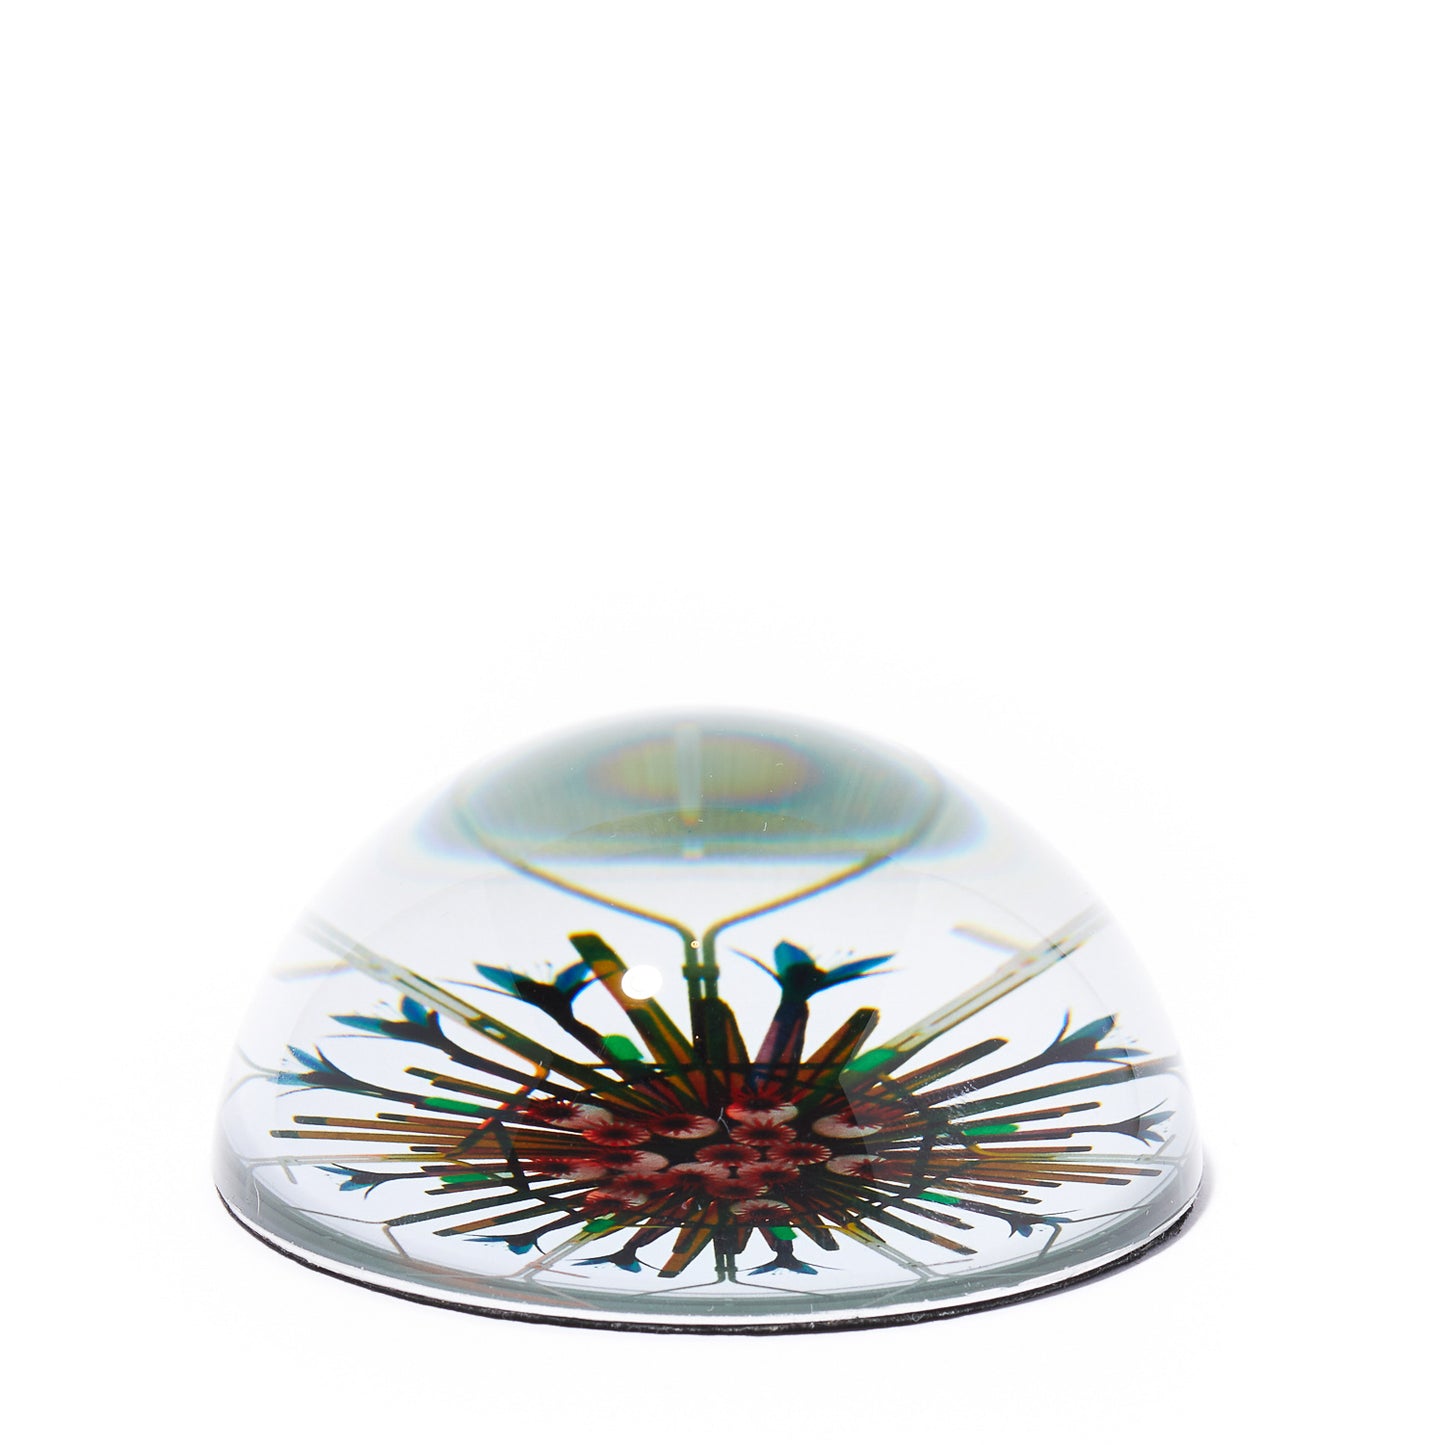 THE OBSERVATORY CACTUS PAPERWEIGHT